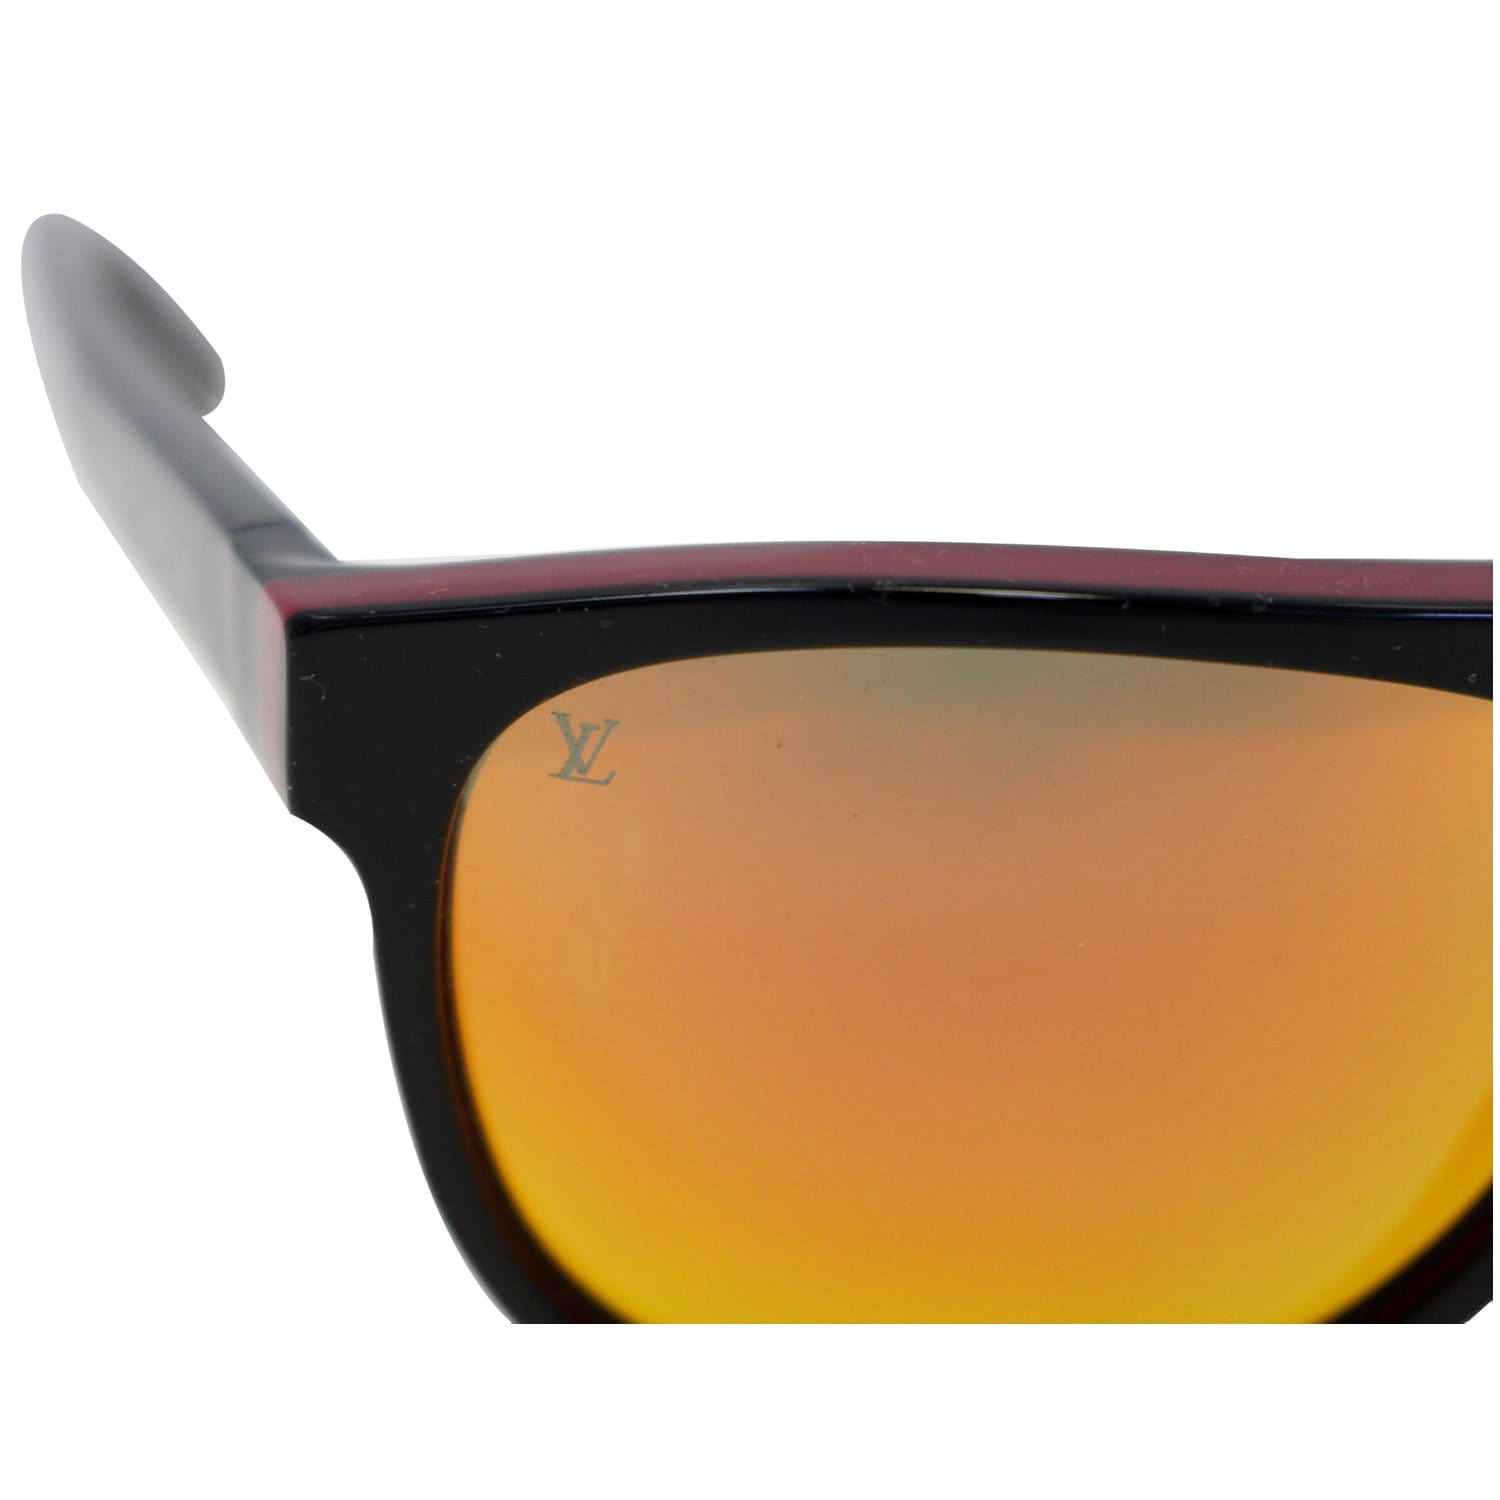 Louis Vuitton Oliver Sunglasses For Women Black/Red